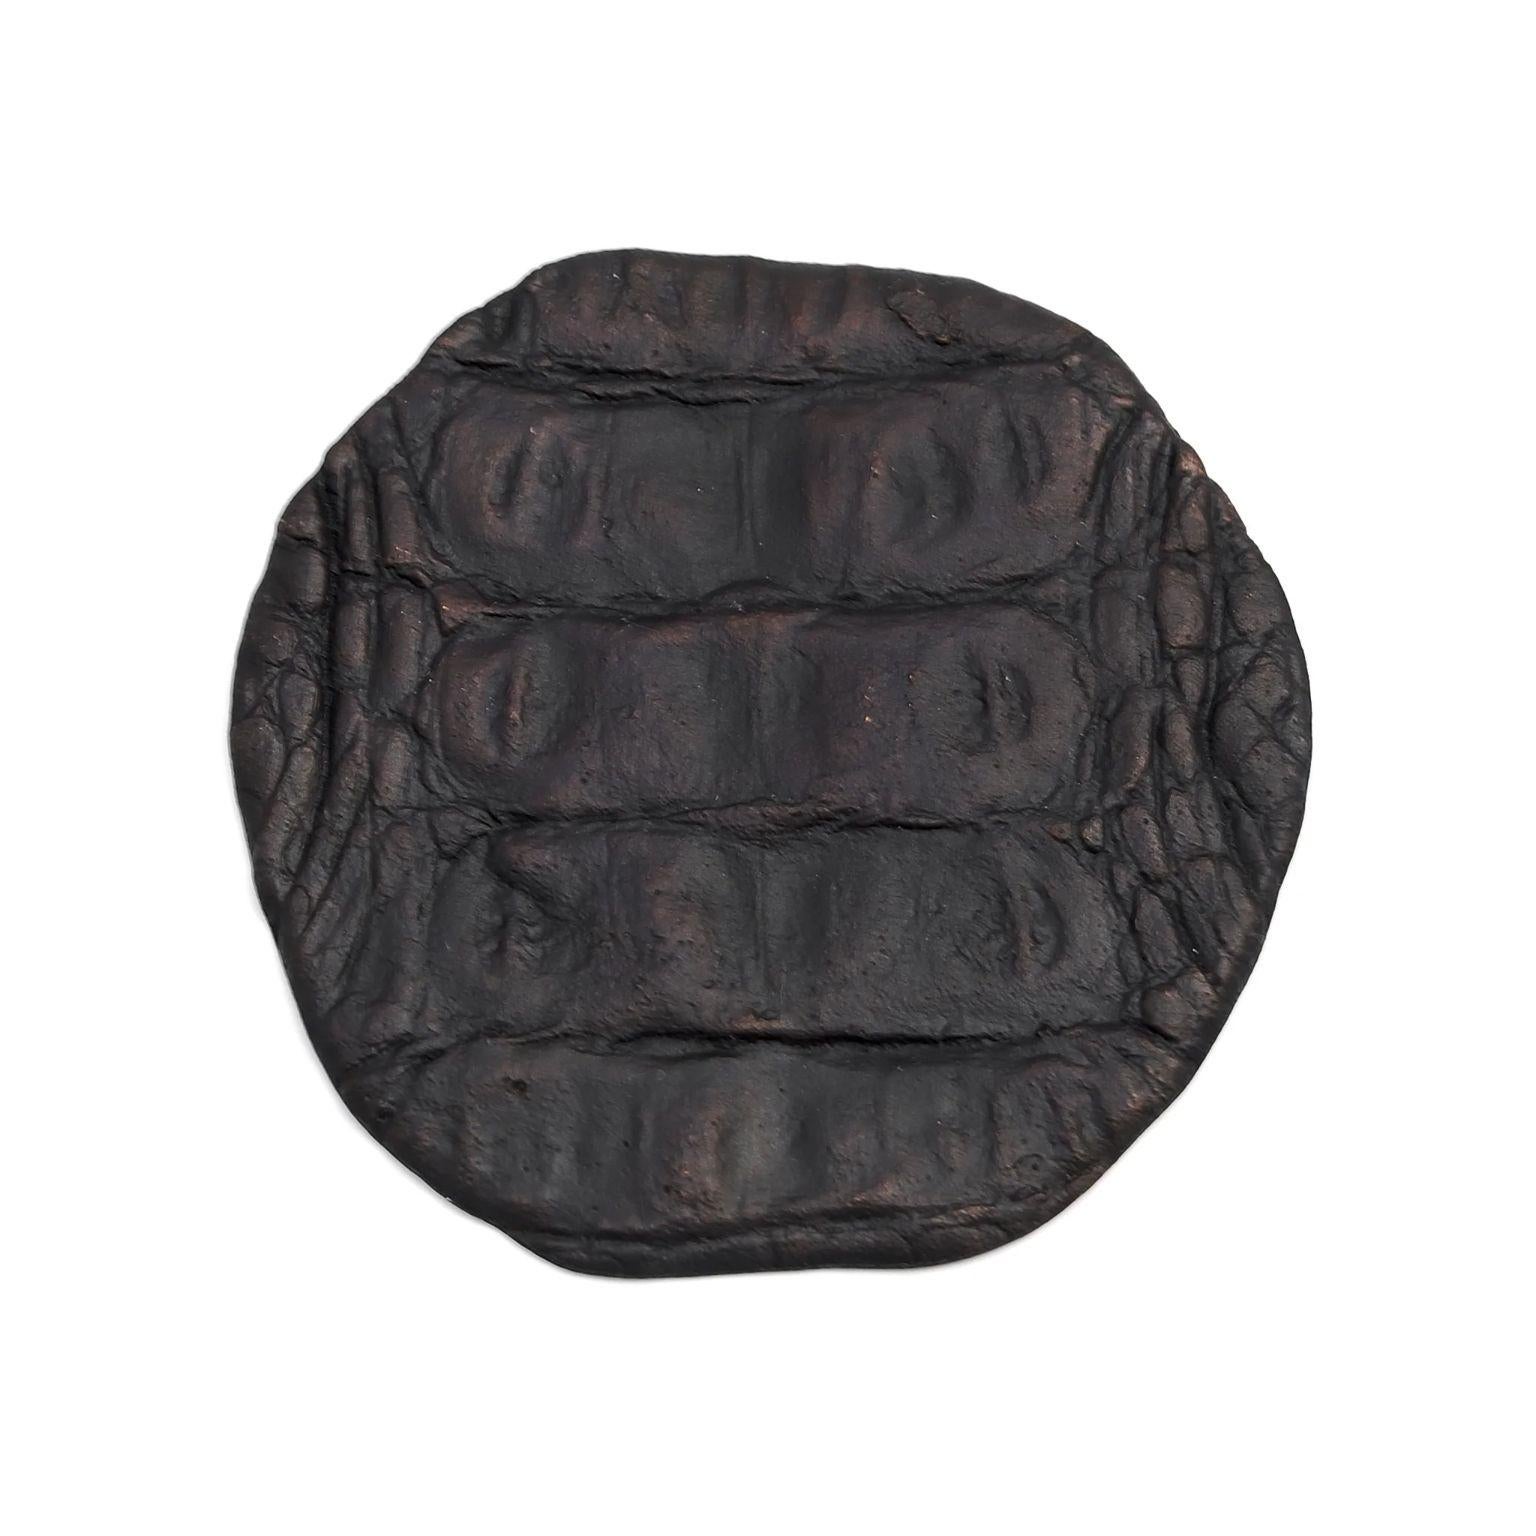 Crocodile coaster 2 by Fakasaka Design
Dimensions: W 11 cm D 11 cm H 0.6 cm.
Materials: dark bronze.
Also available in polished bronze.

CROCODILE COASTER 2 CUP COASTER / BOTTLE COASTER / CANDLE TRAY 

 FAKASAKA is a design company focused on